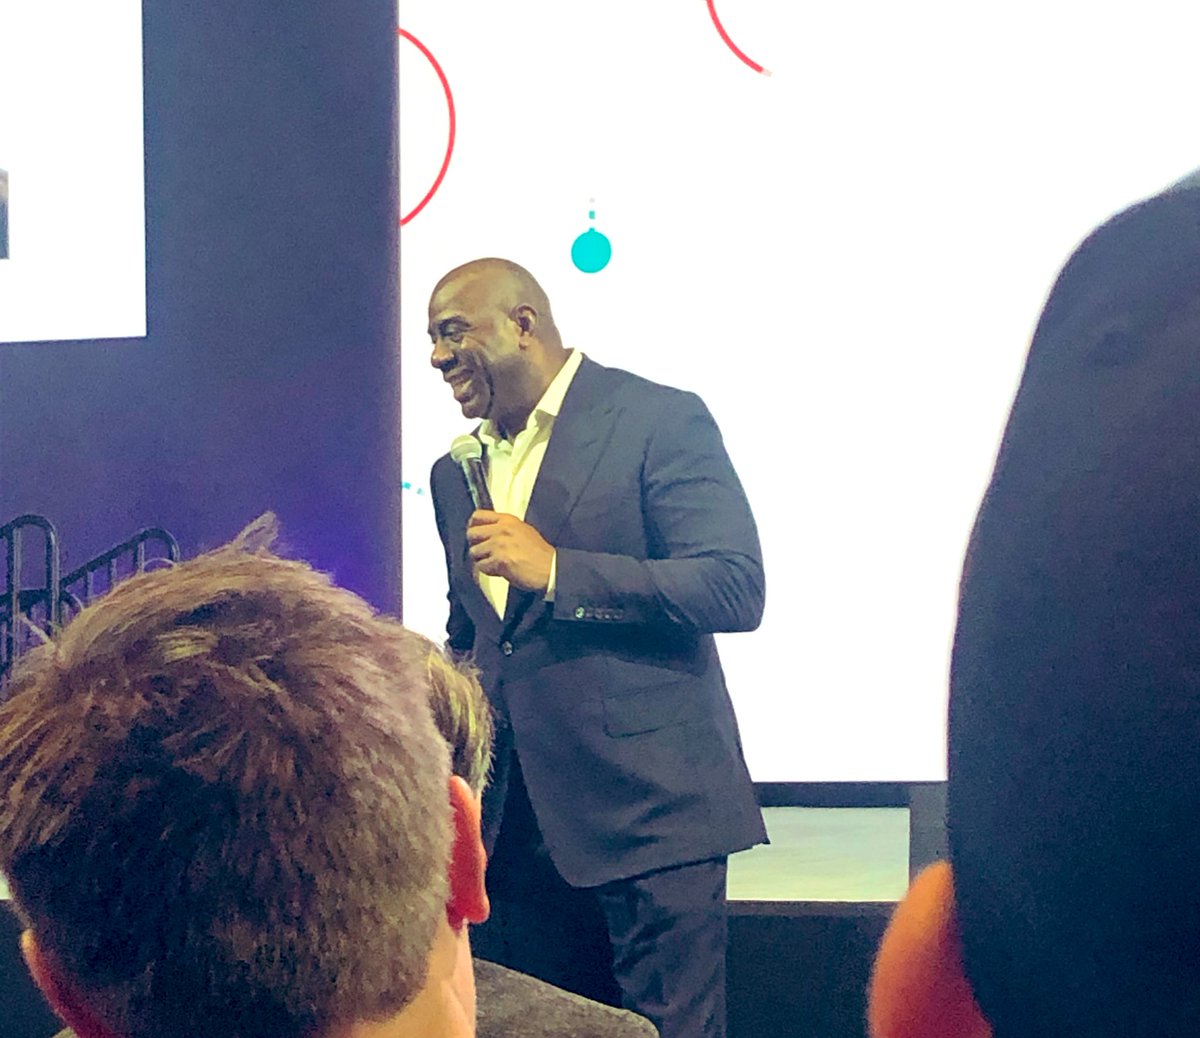 Wauw! Talk about over-delivering 🌟 @MagicJohnson was chest bumping and winning hearts at his #magic and charismatic #keynote at #SitecoreSYM ! #winningmindset #knowyourcustomers